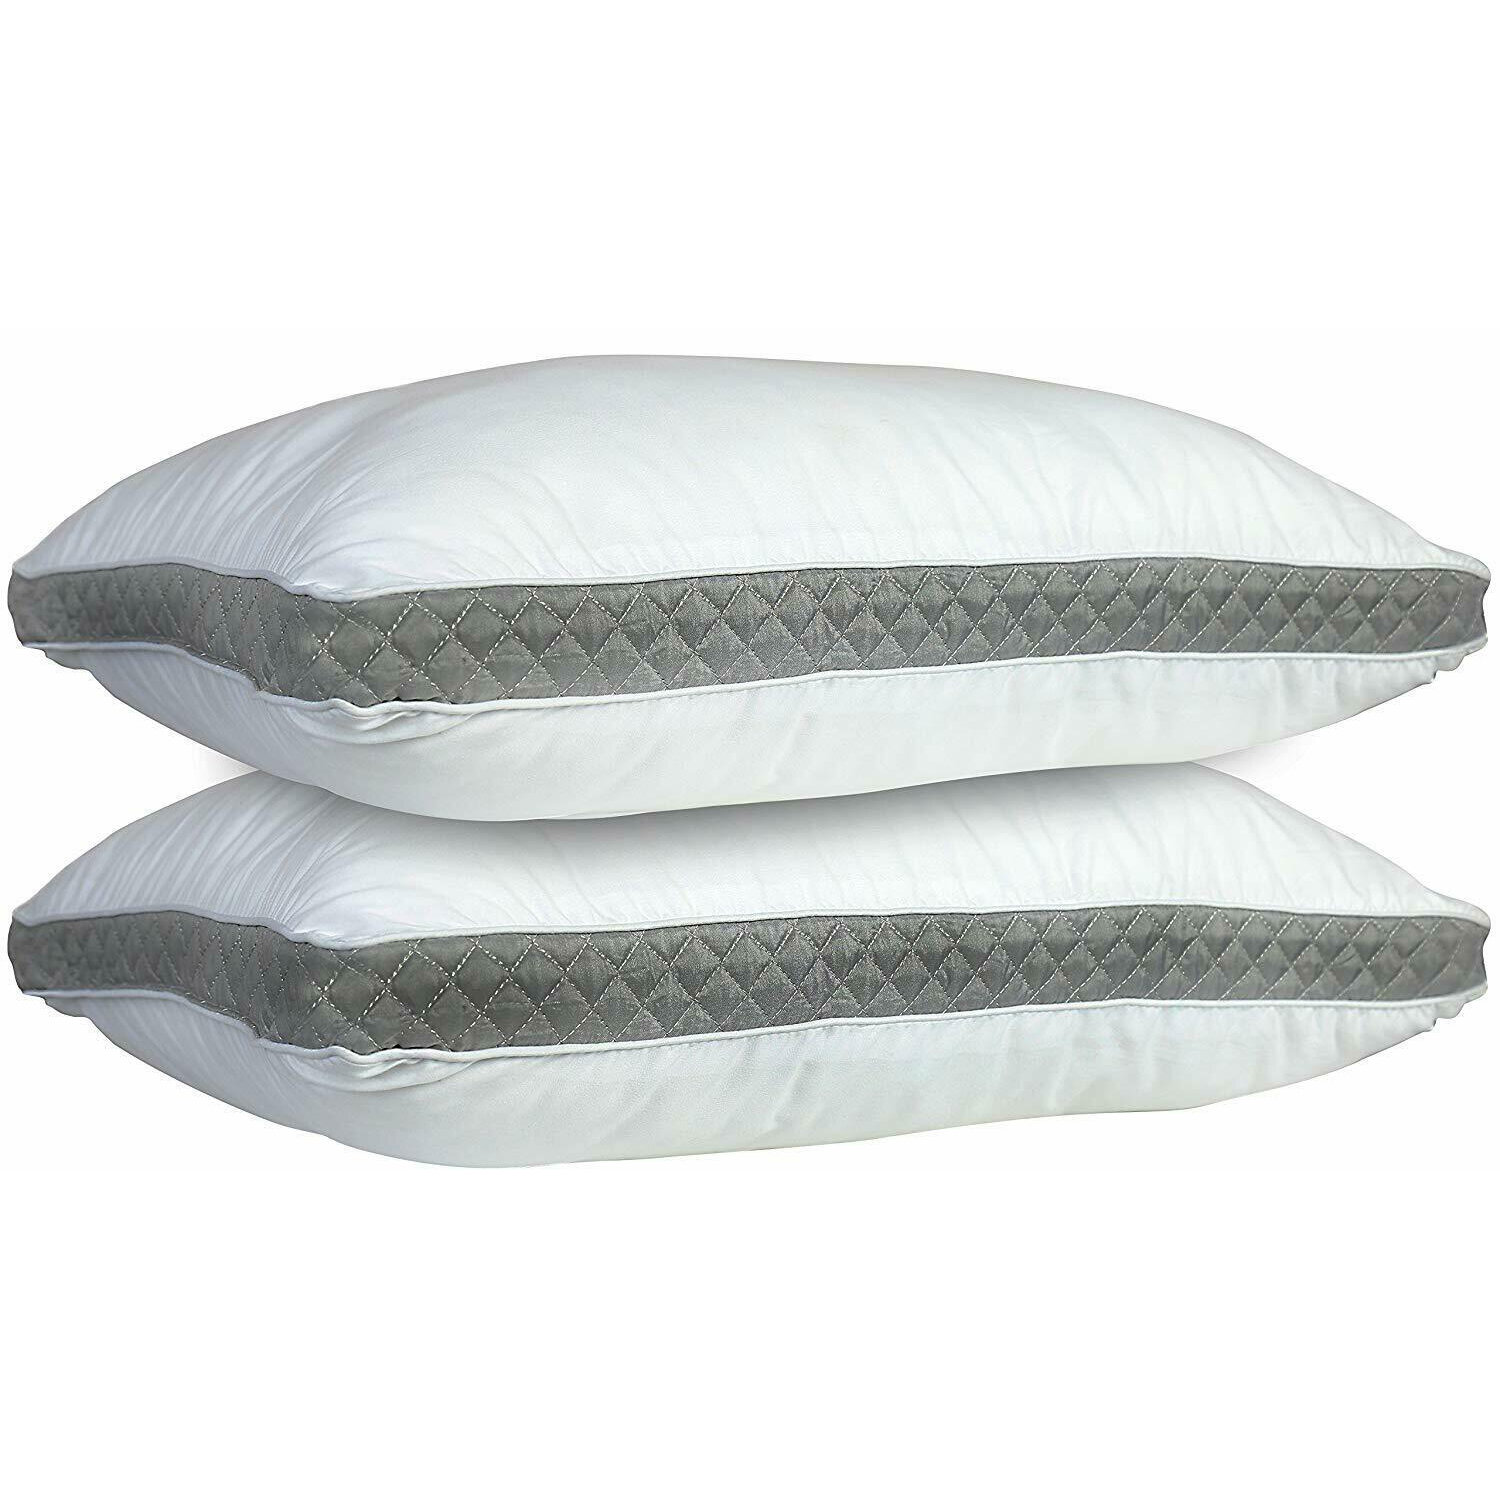 Utopia Bedding Bed Pillows for Sleeping (Grey), Queen Size, Set of 2, Hotel  Pillows, Cooling Pillows for Side, Back or Stomach Sleepers